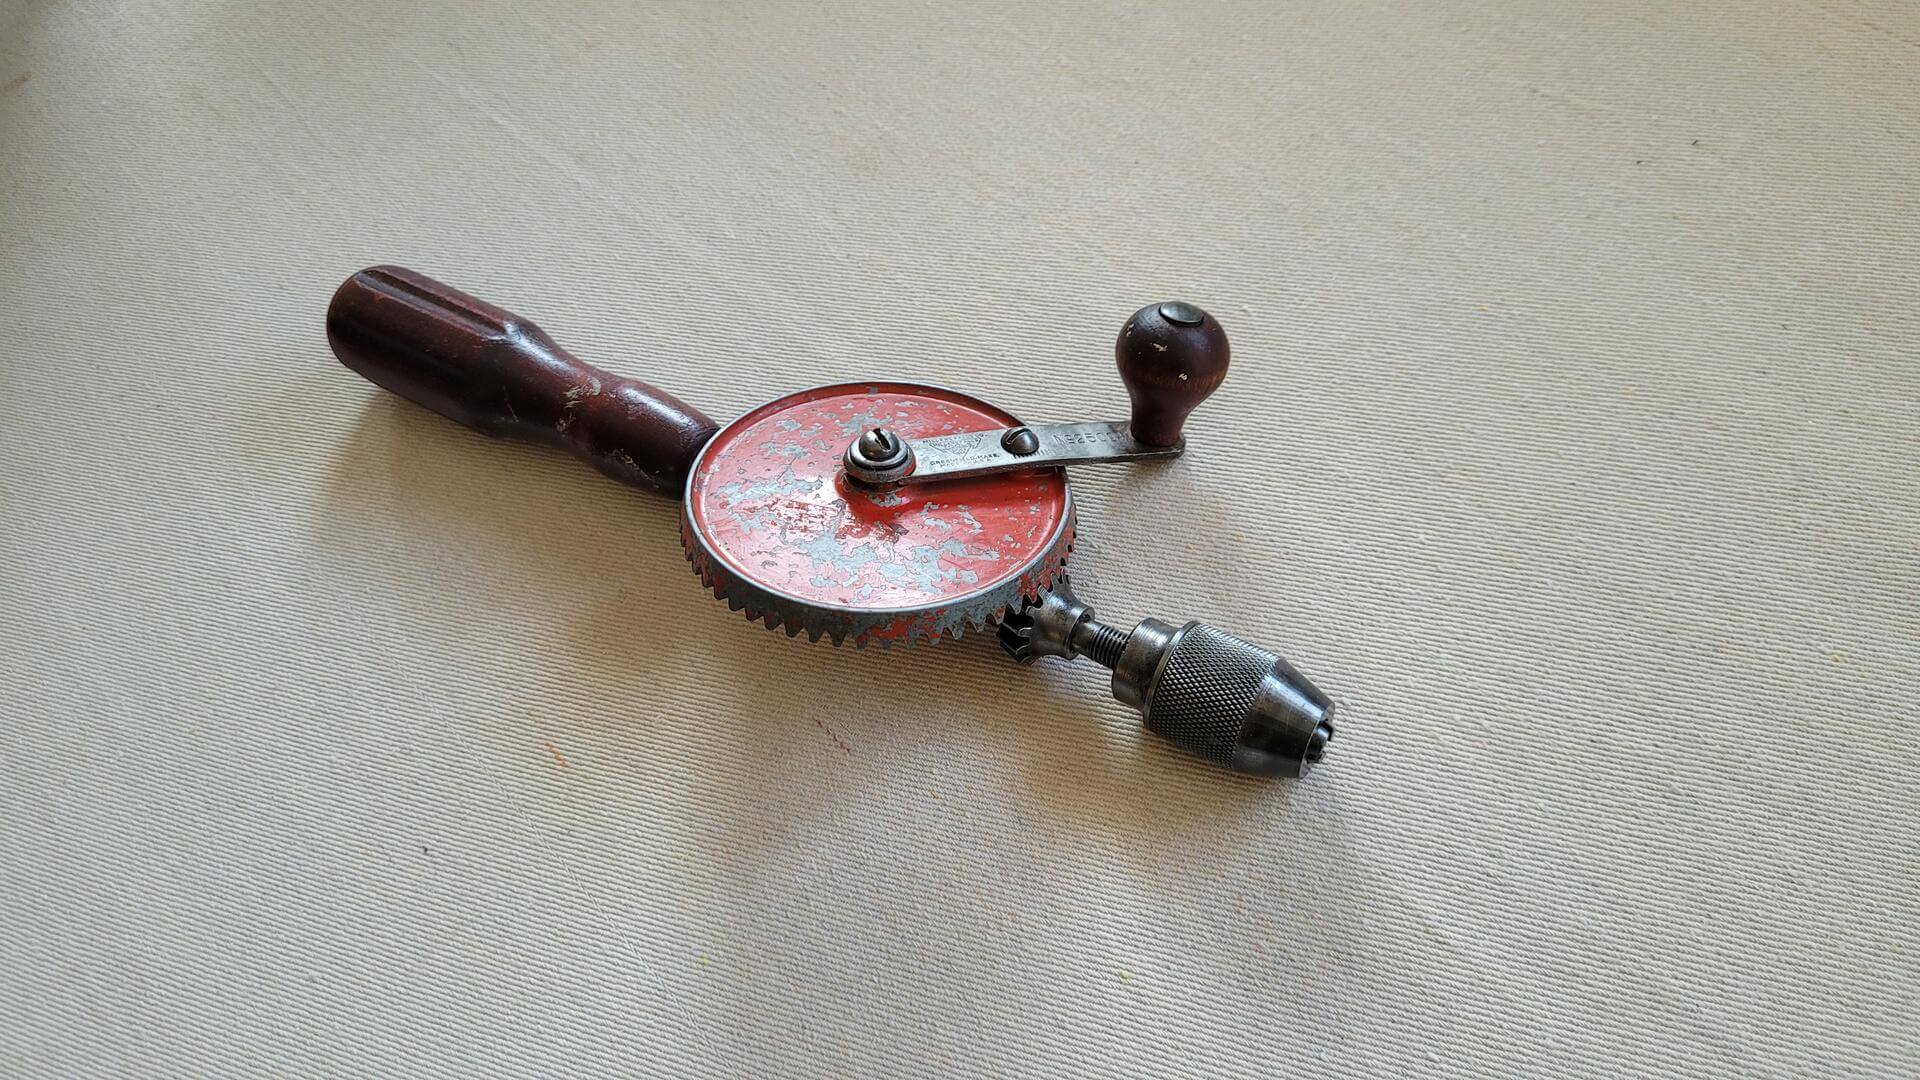 miller-falls-tools-2500a-egg-beater-hand-drill-antique-vintage-made-in-usa-collectible-carpentry-woodworking-tools